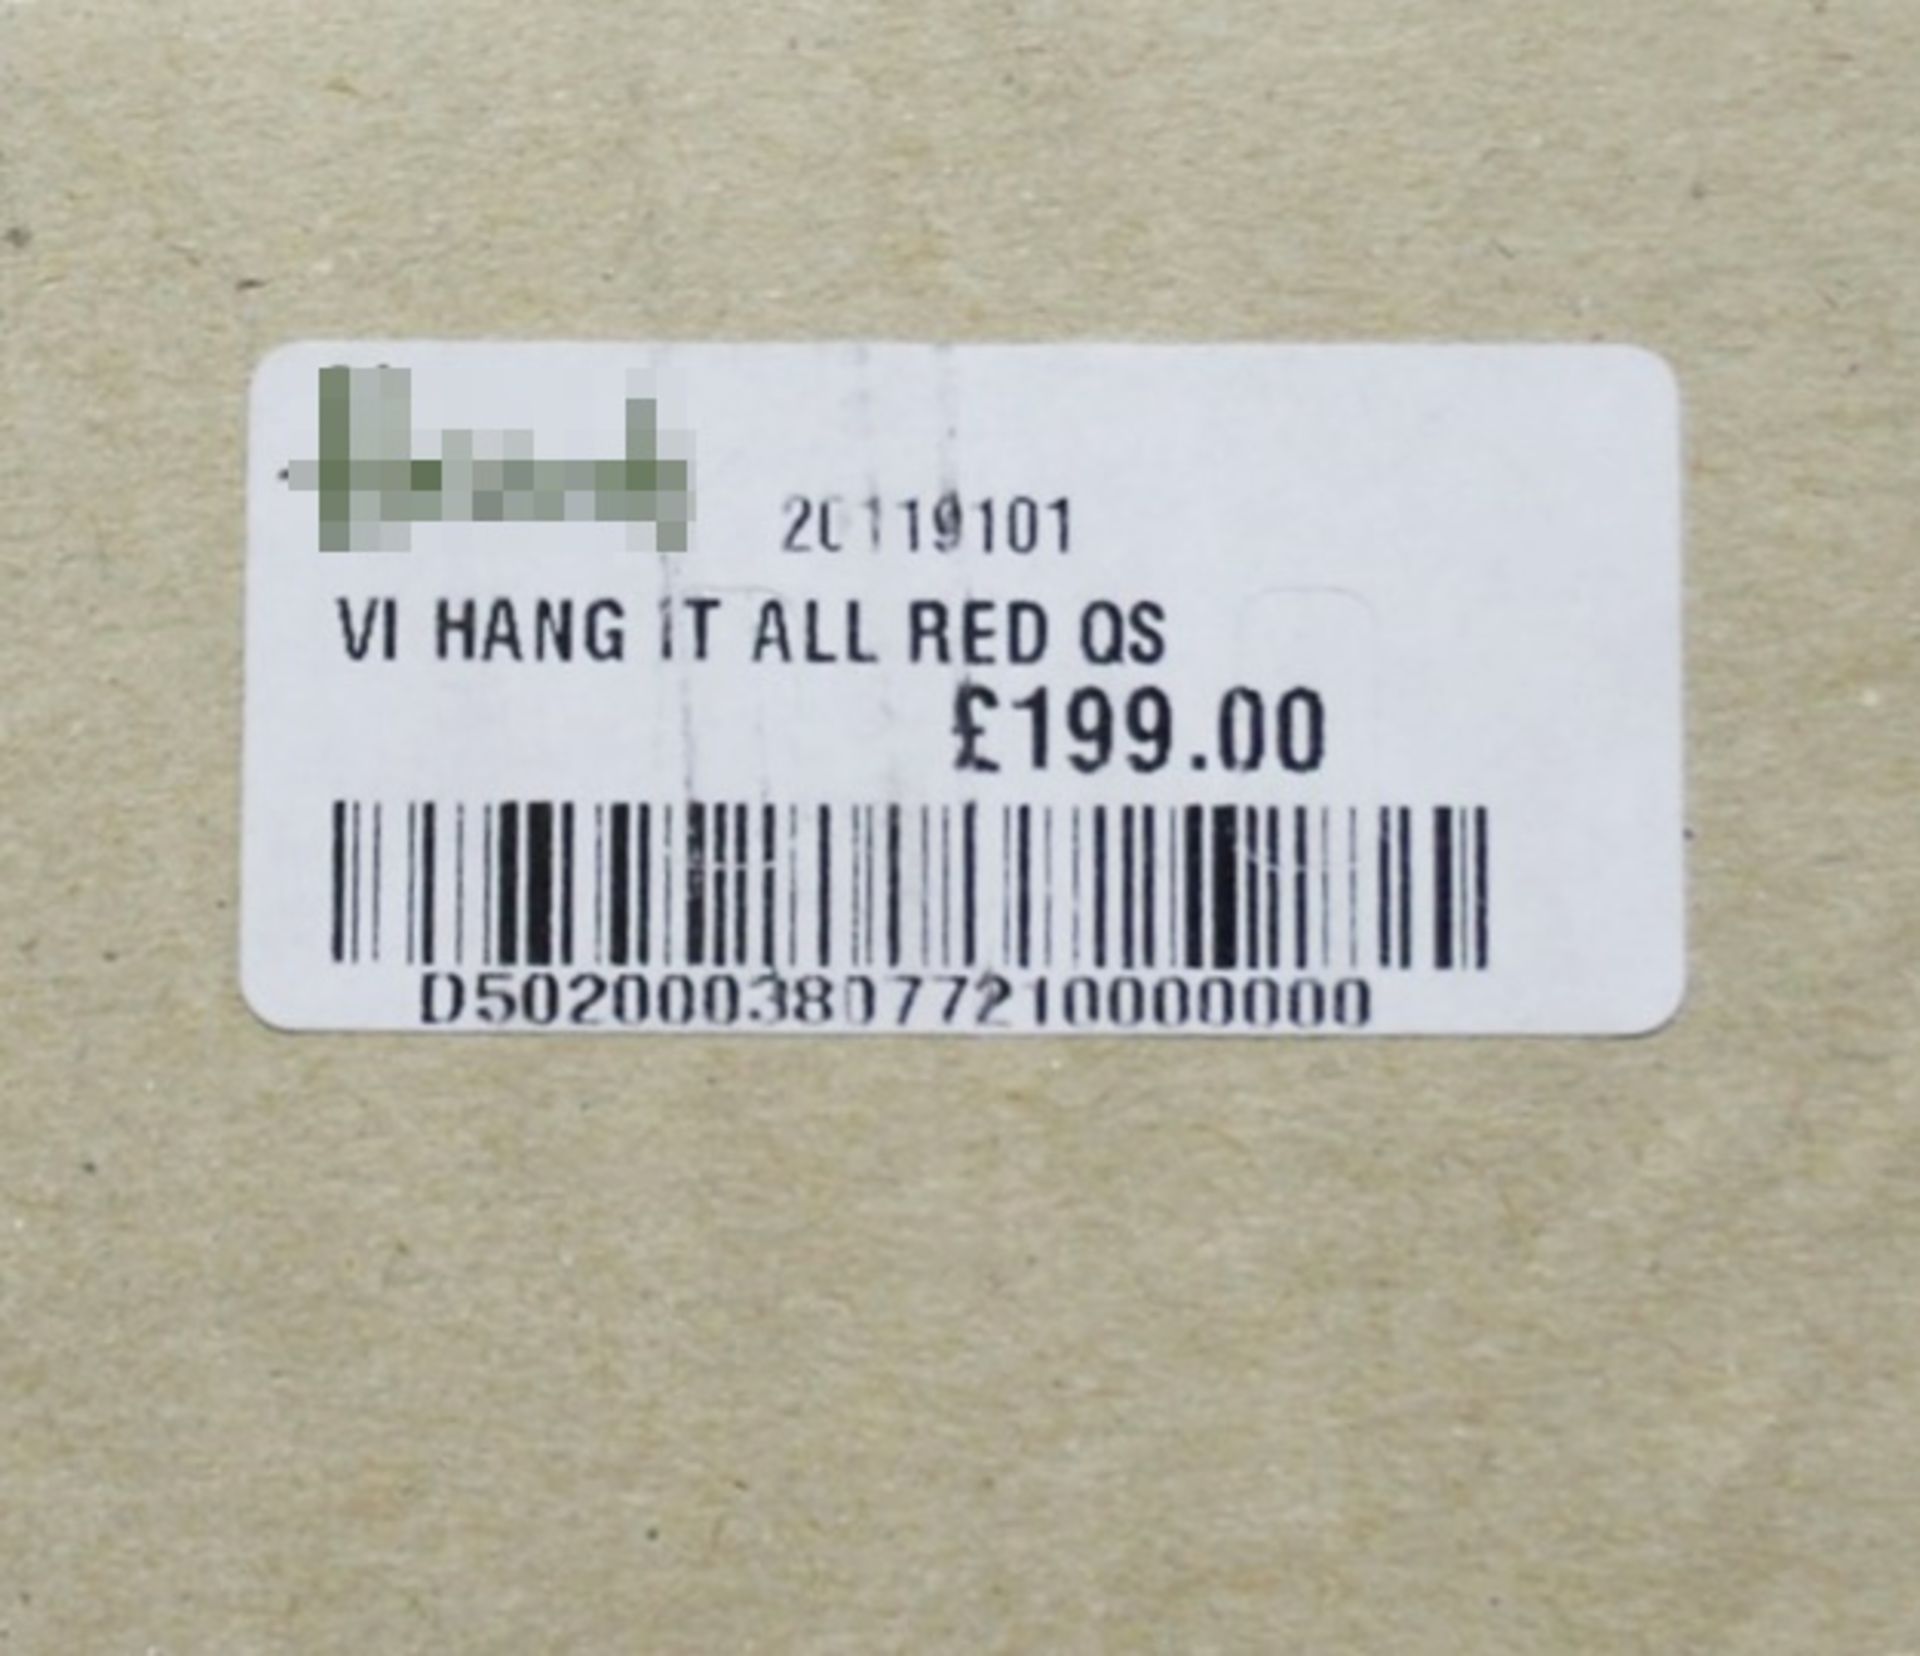 1 x VITRA Eames 'Hand It All' Special Edition Hanger In Red - Original RRP £199.00 - Unused Boxed - Image 3 of 4